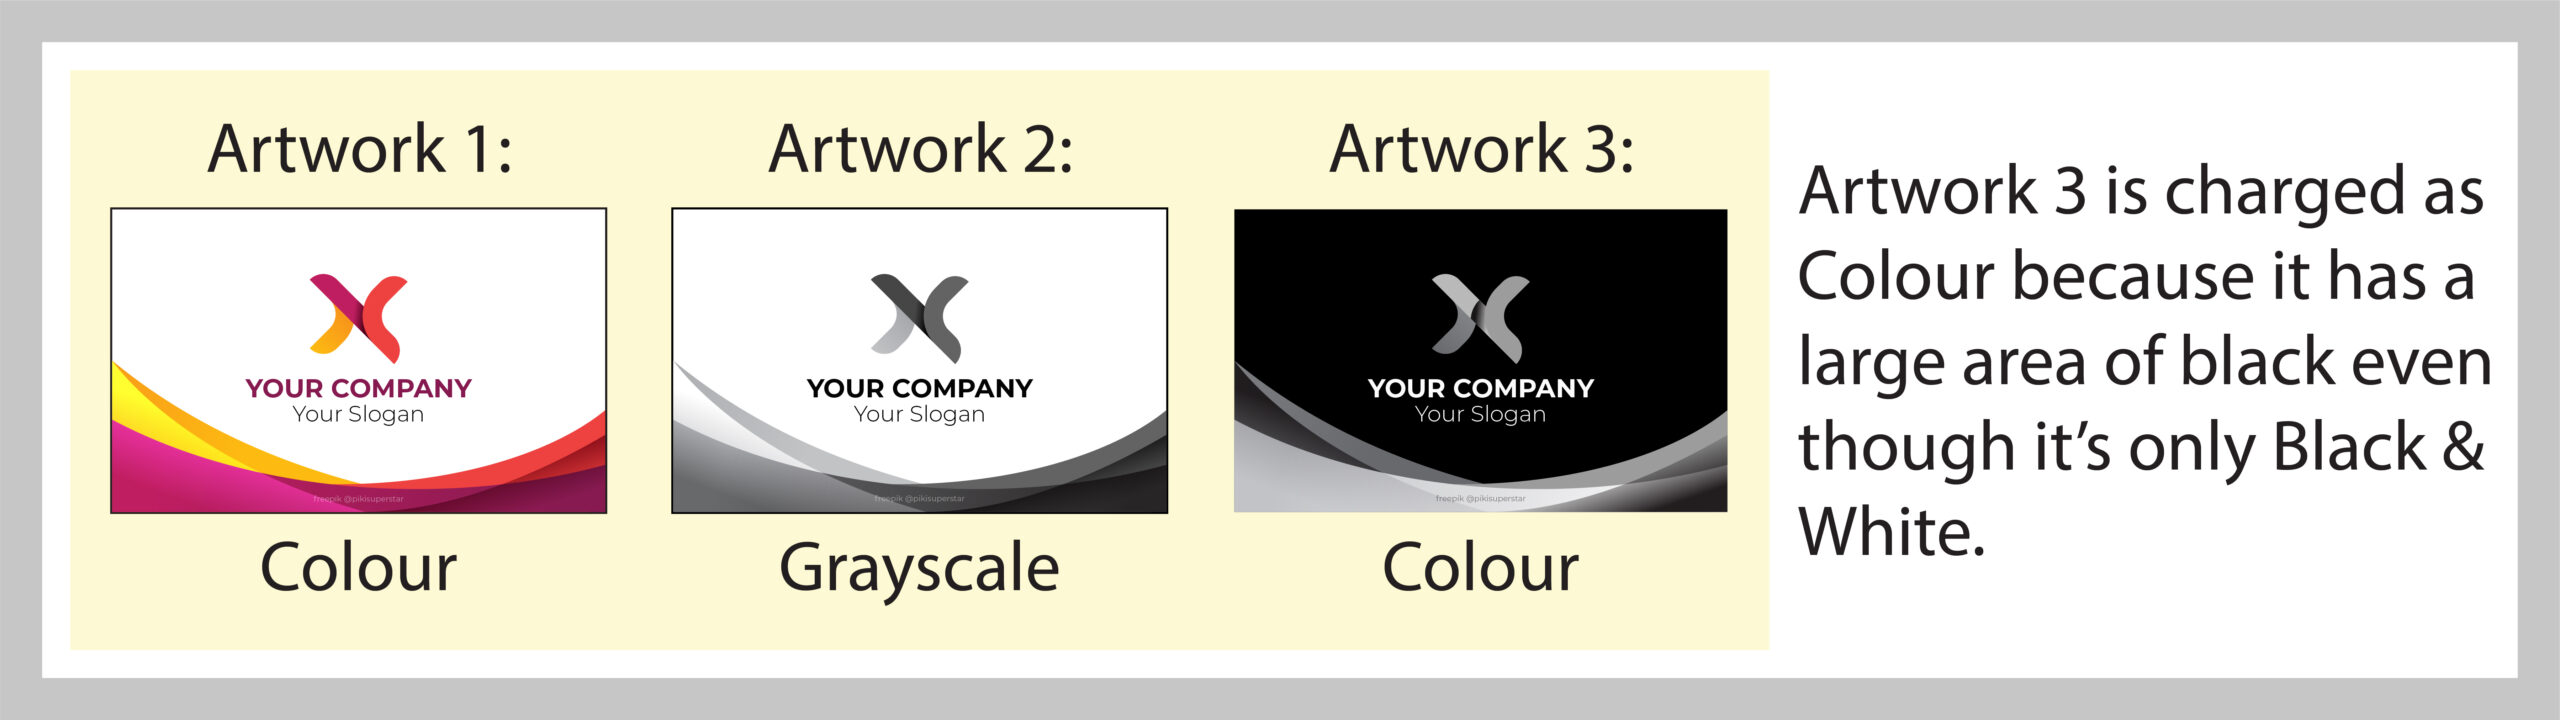 Artwork Diagram - Determining what is Colour & Grayscale